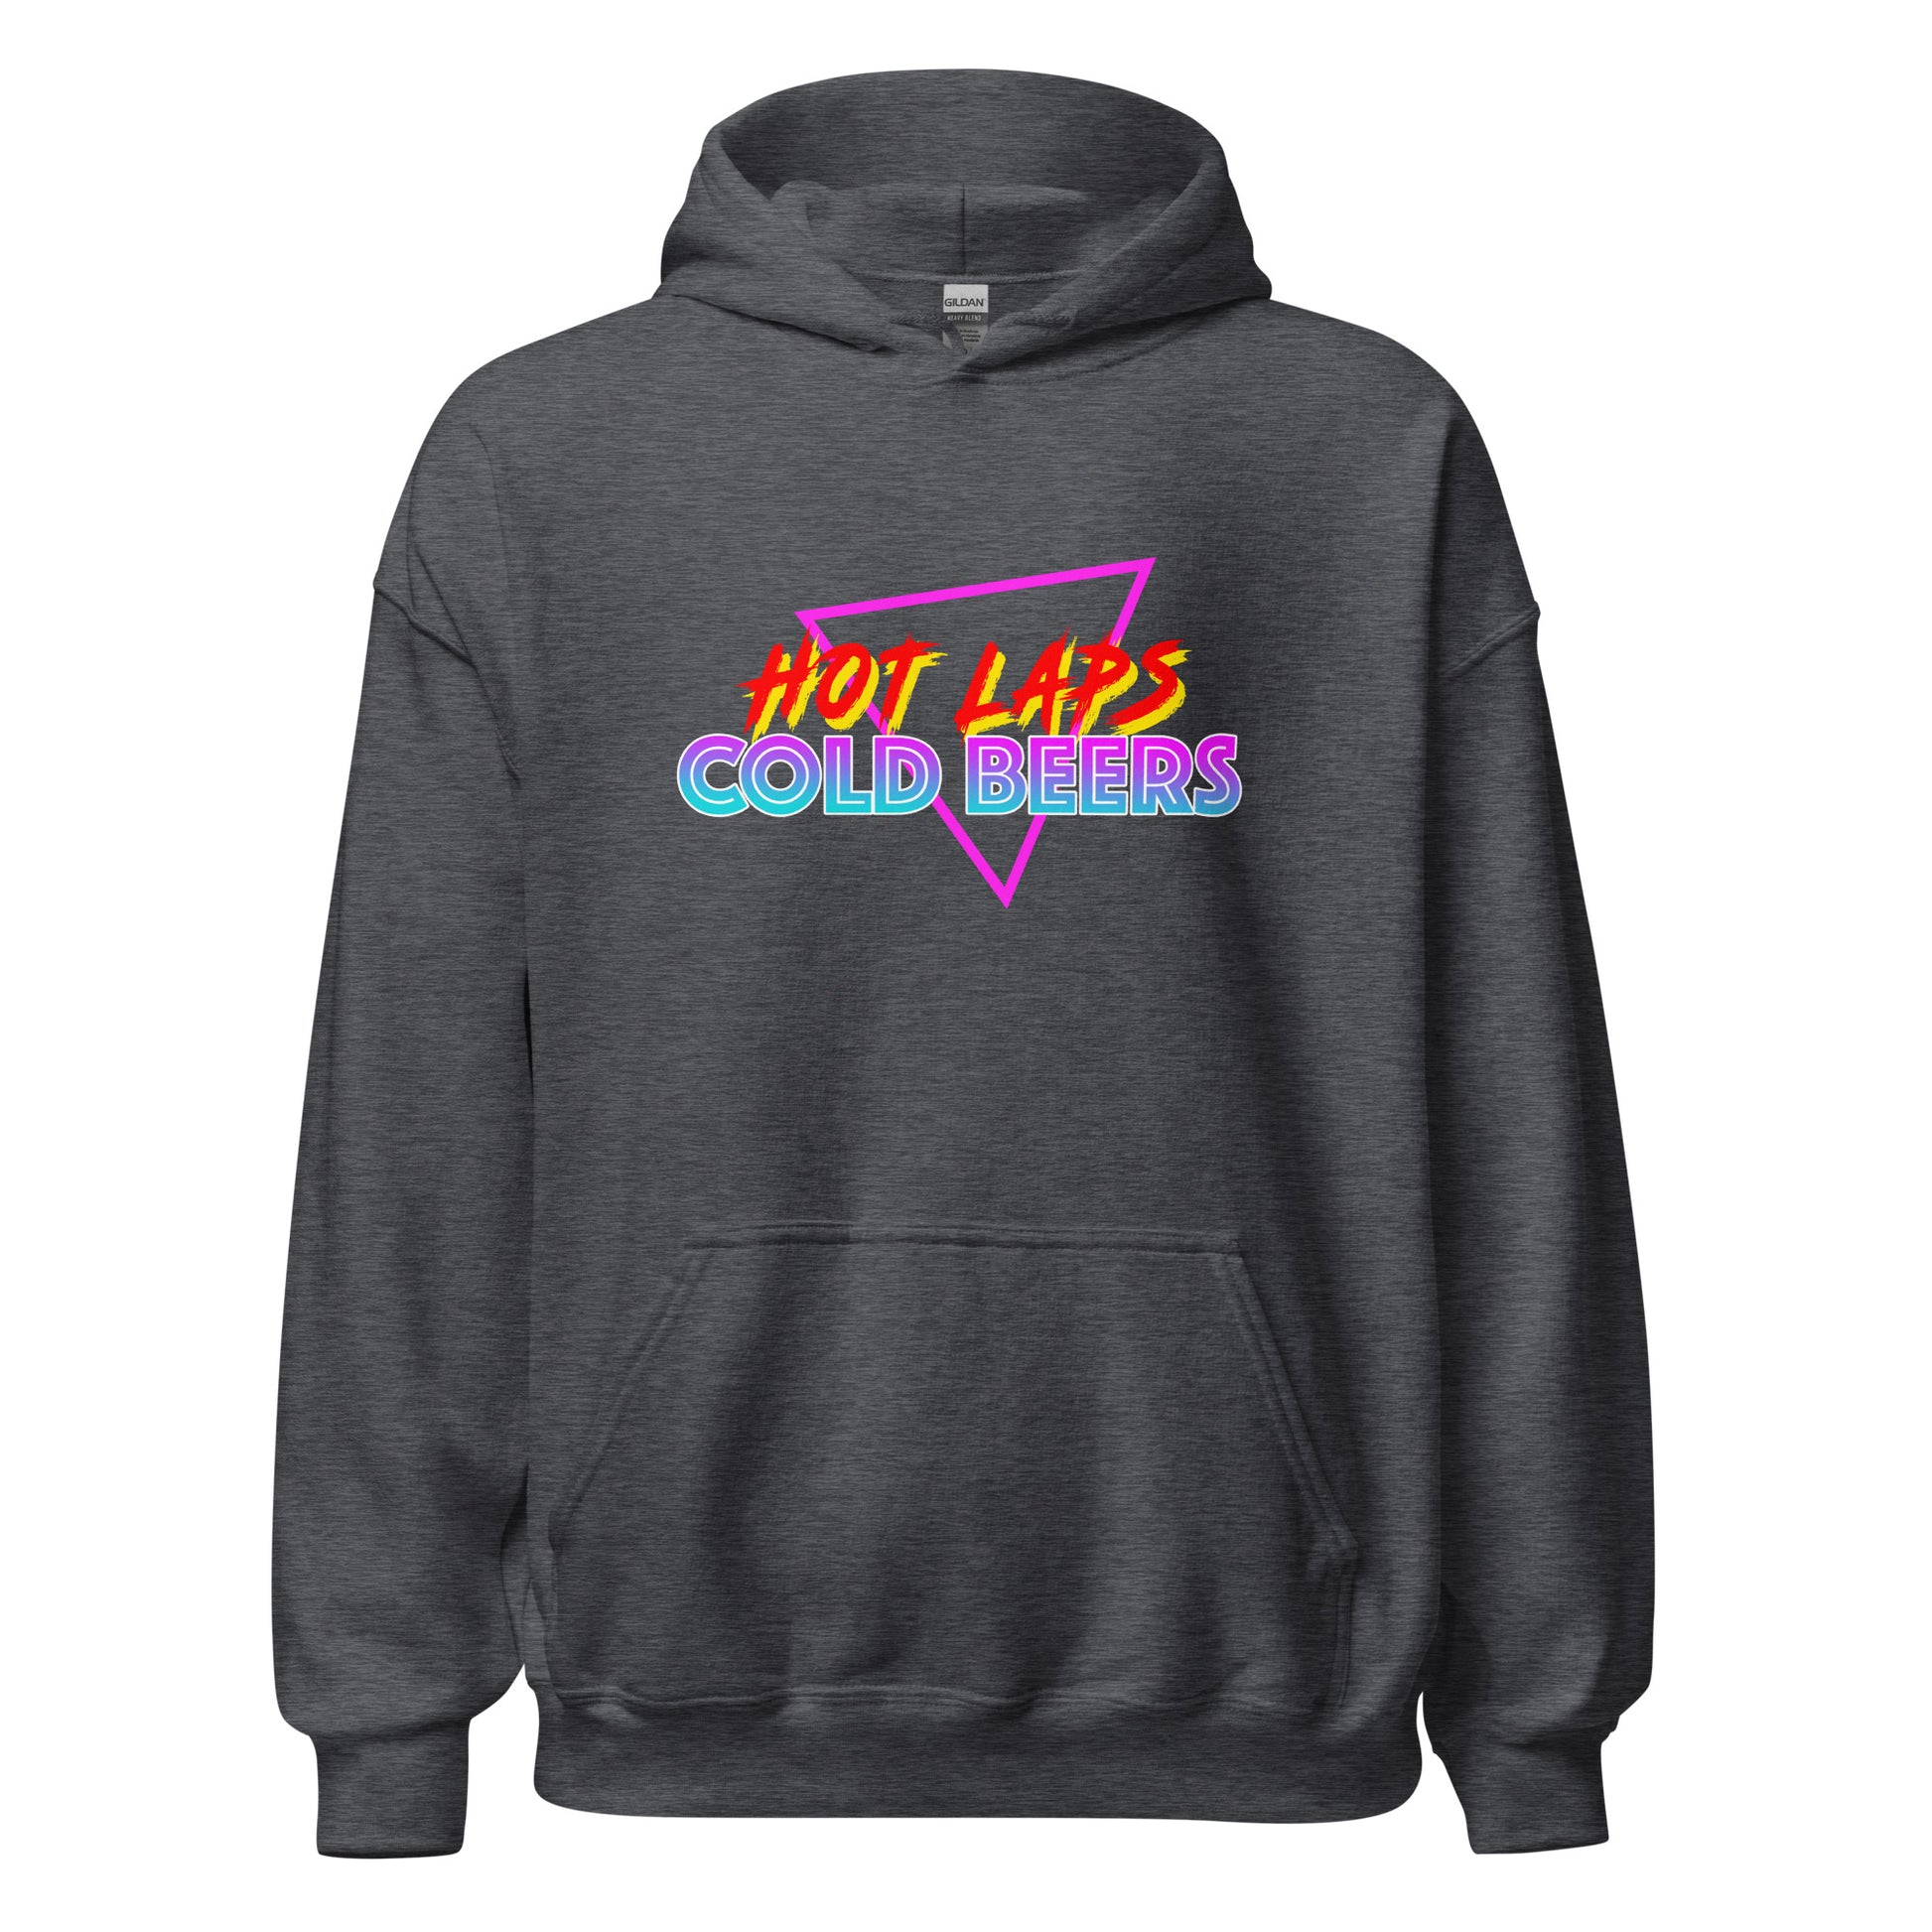 Hot Laps Cold Beers Hoodie printed by Whistler Shirts